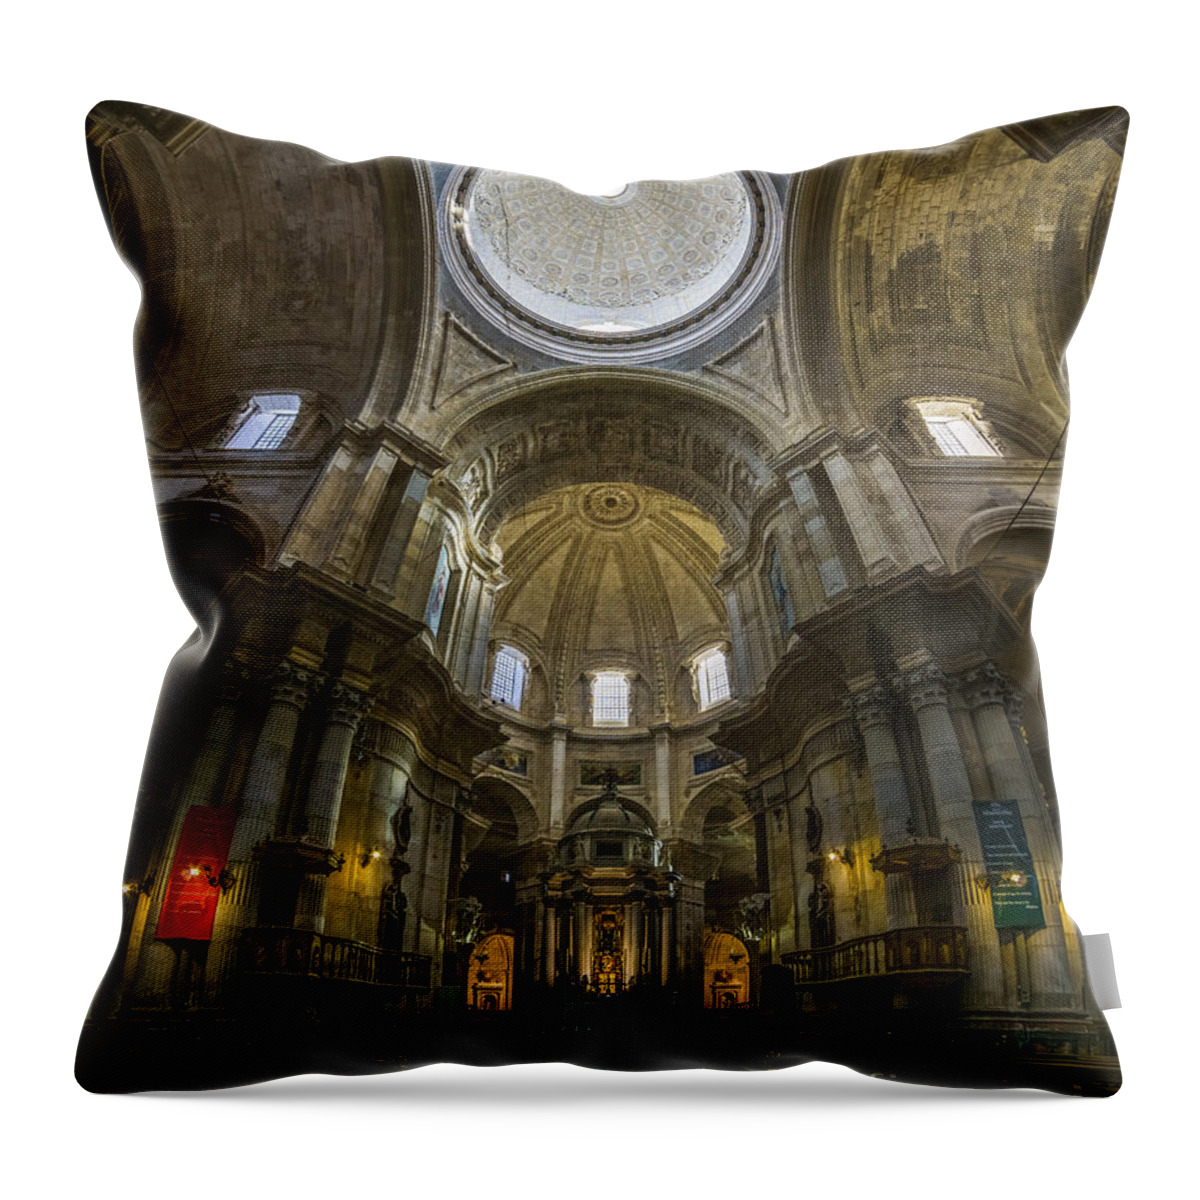 Andalucia Throw Pillow featuring the photograph Inside Cadiz Cathedral Cadiz Spain by Pablo Avanzini